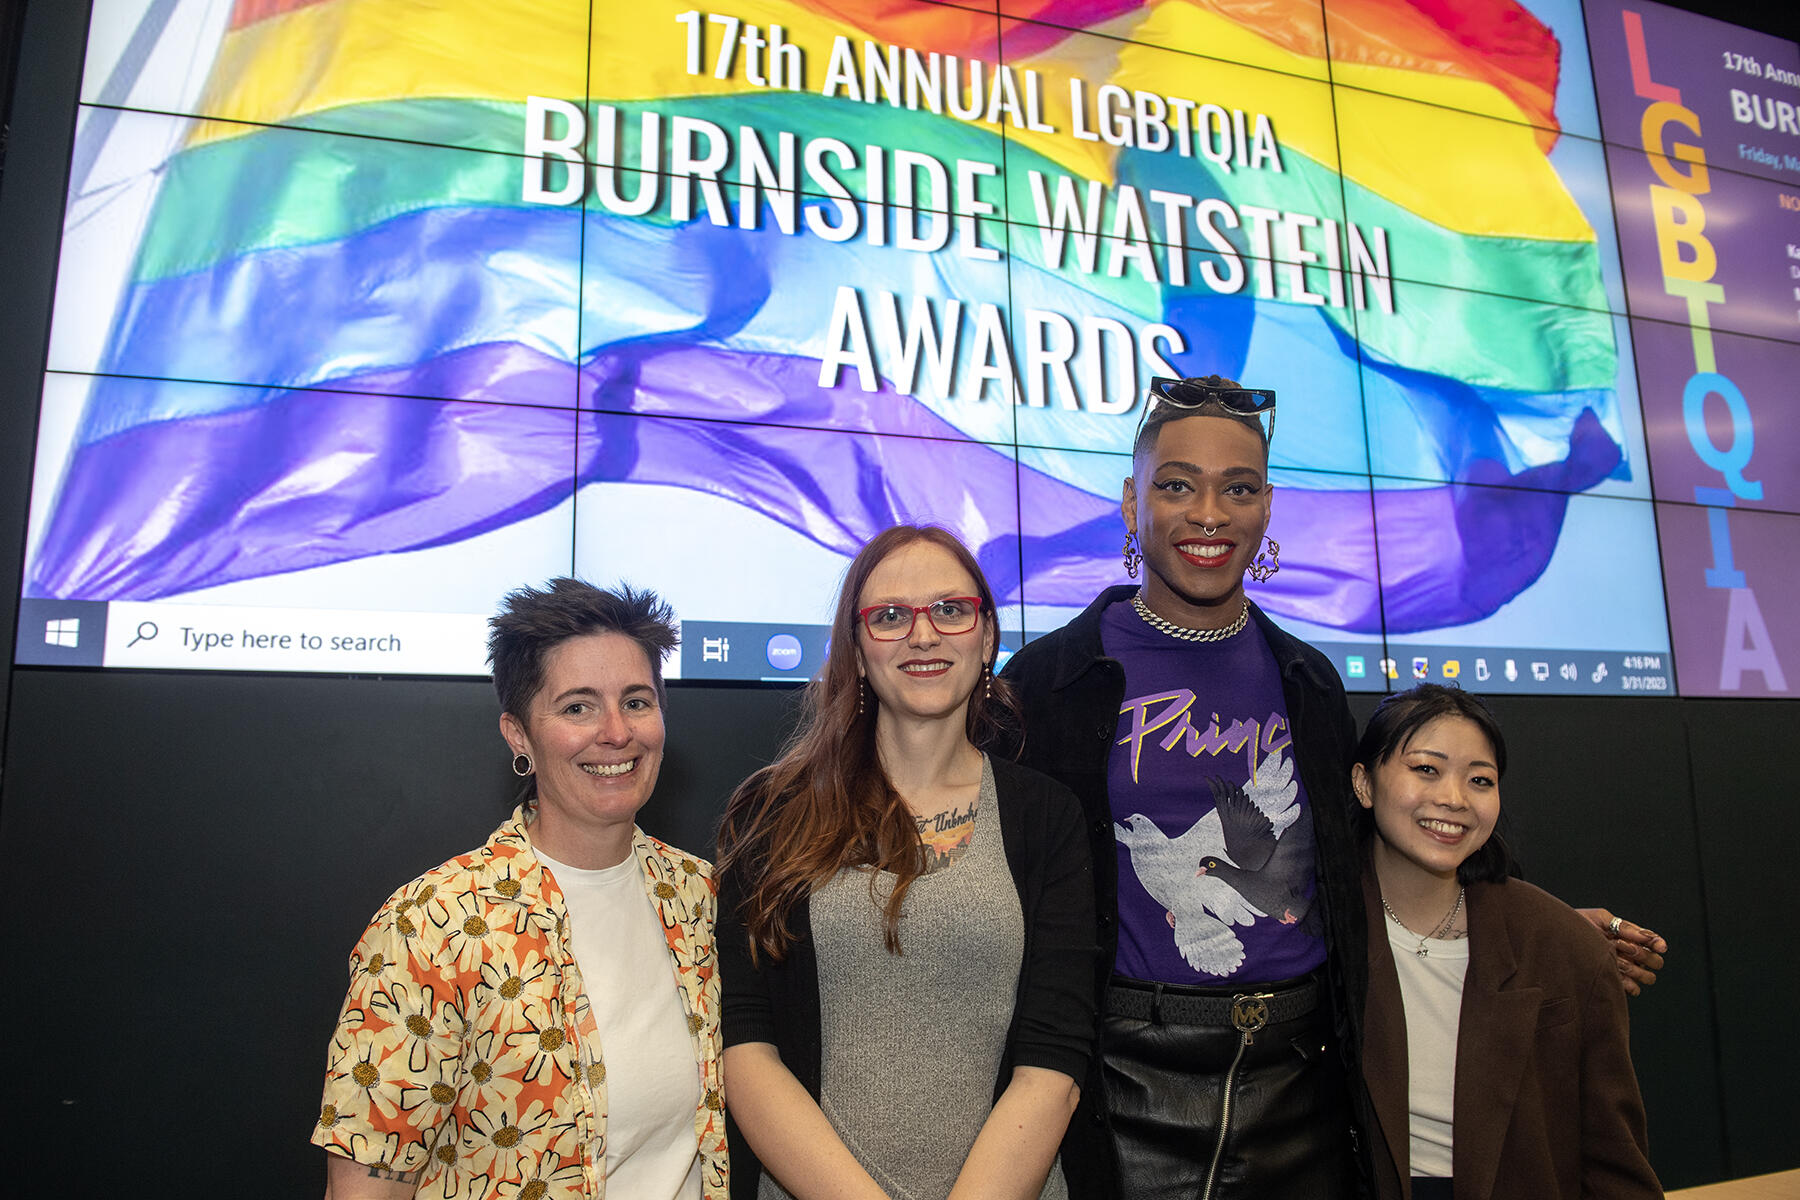 Four people standing in front of a screen with a rainbow flag and white text that reads \"17th ANNUAL LGBTQIA BURNSIDE WATEIN AWARDS\"